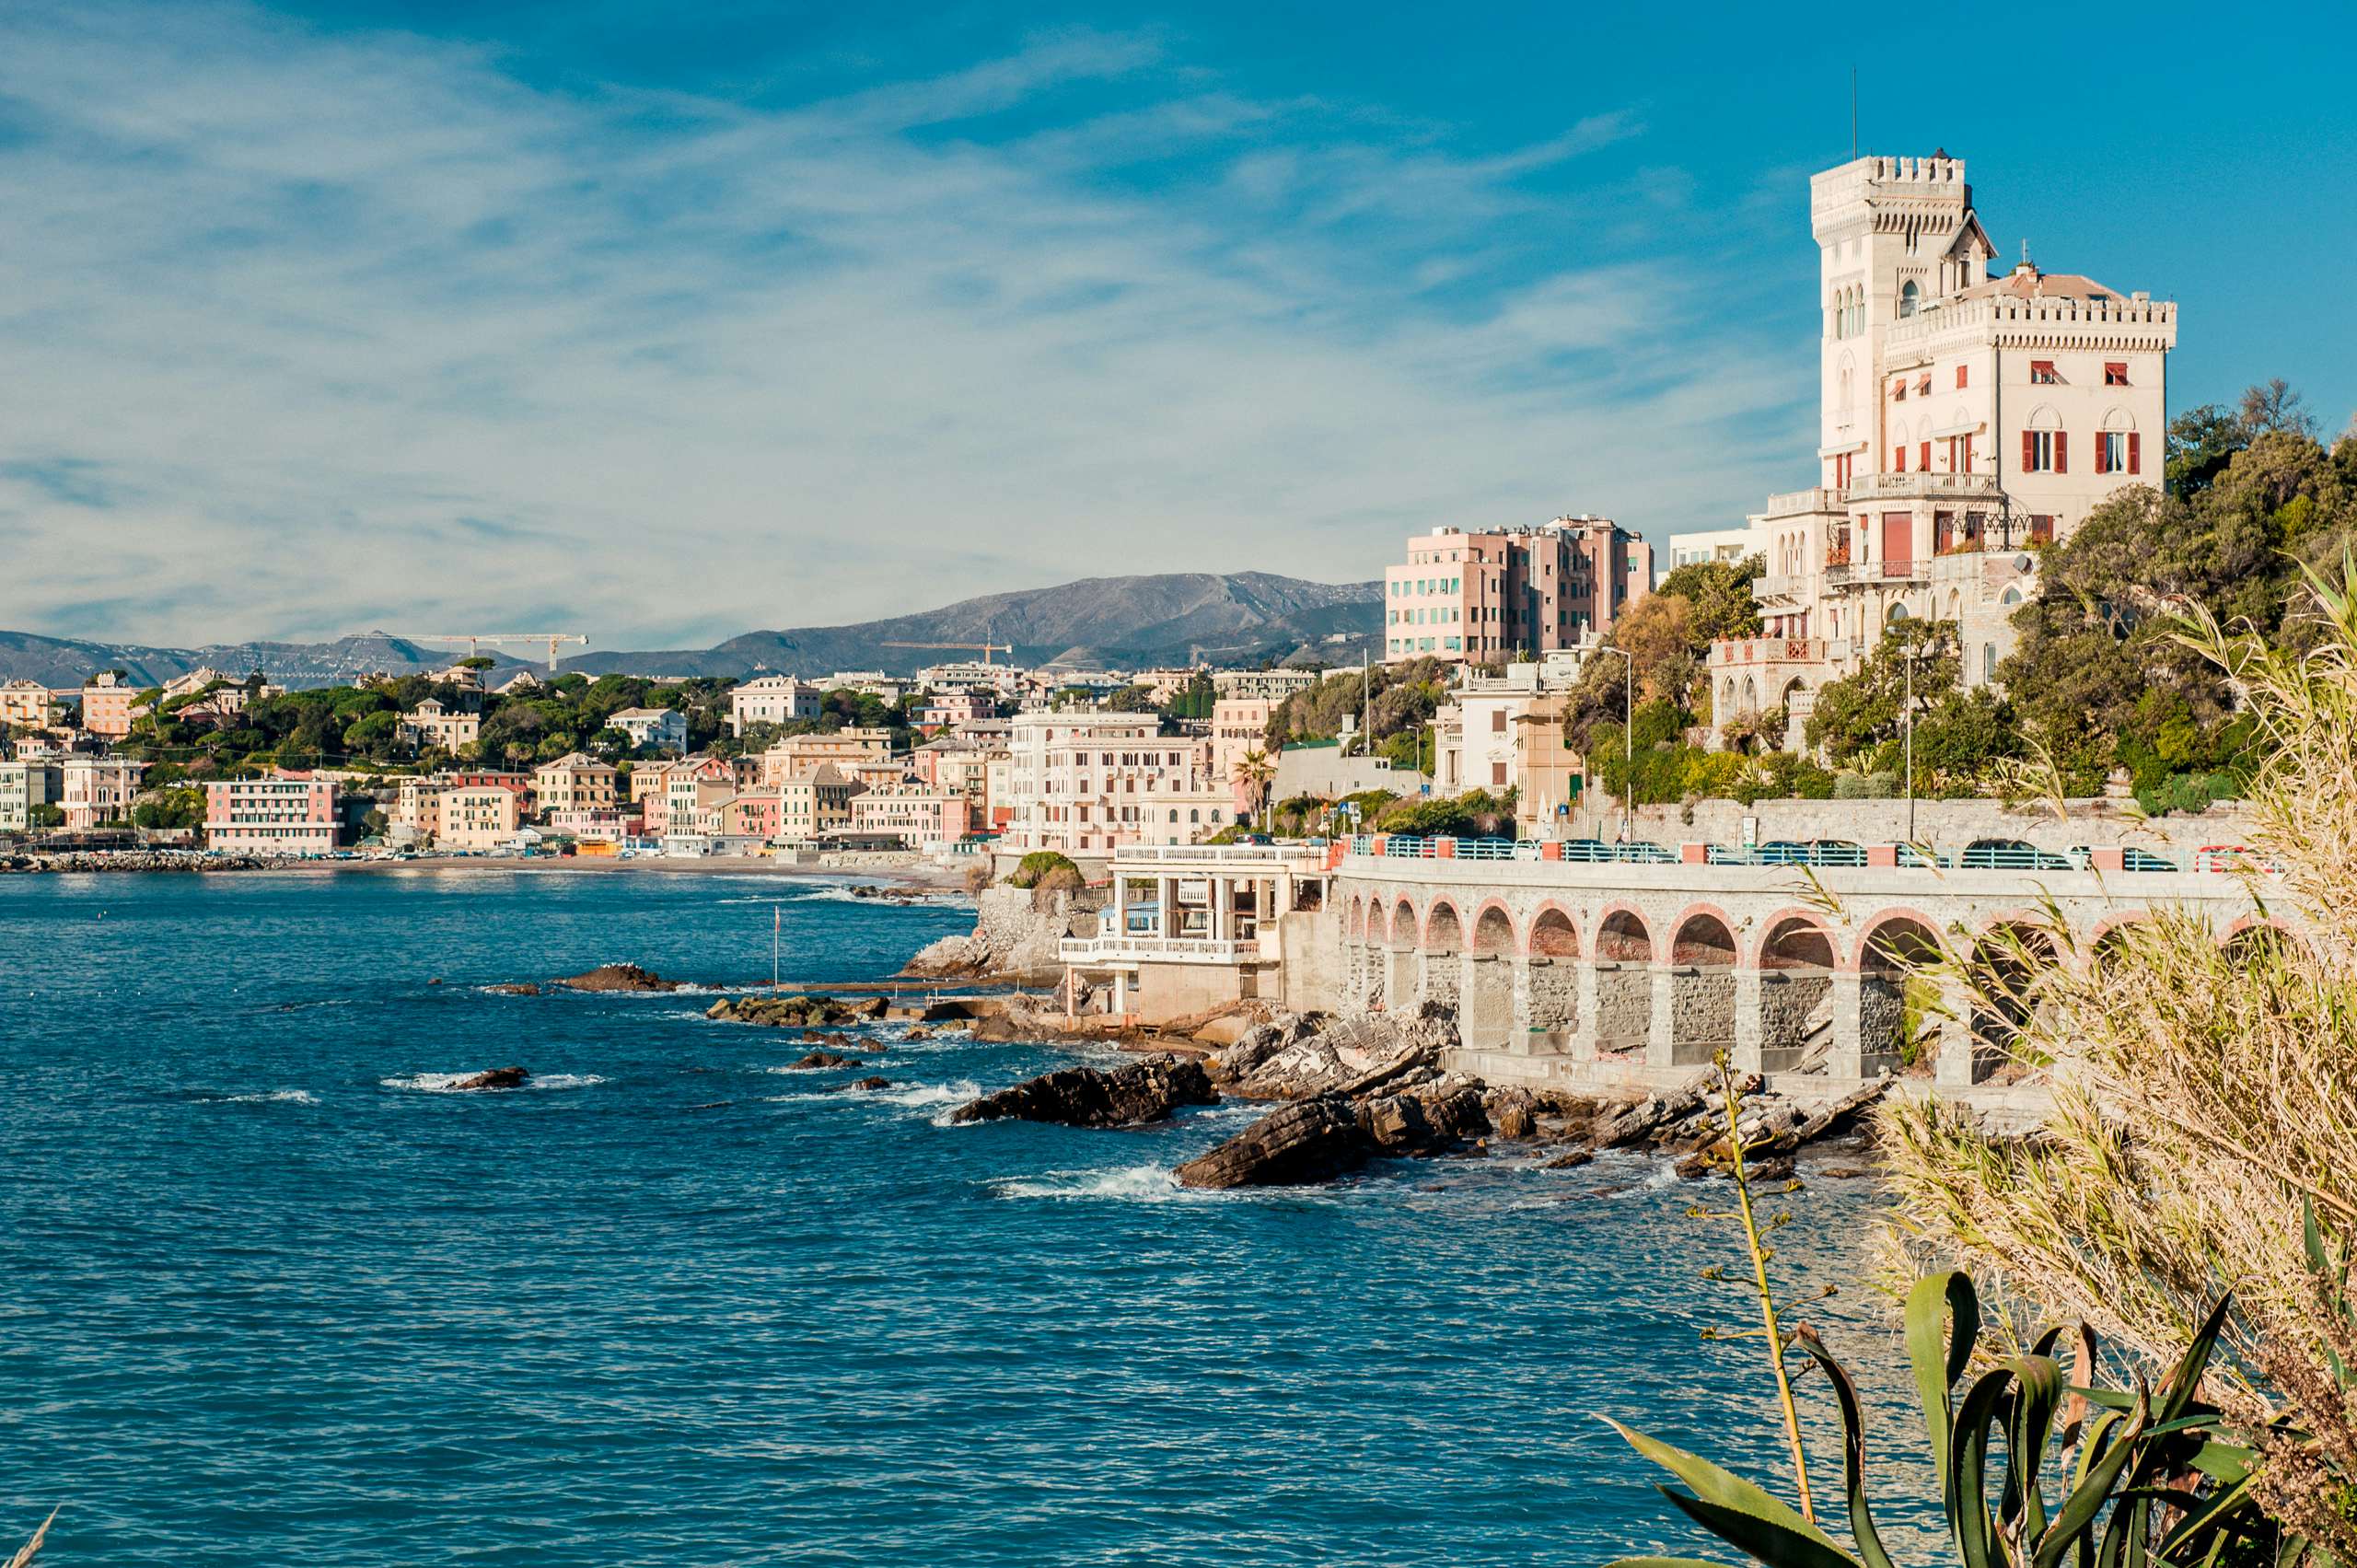 The historic waterfront of Genoa, with its renowned architecture, as seen from the Italian Riviera yacht route.